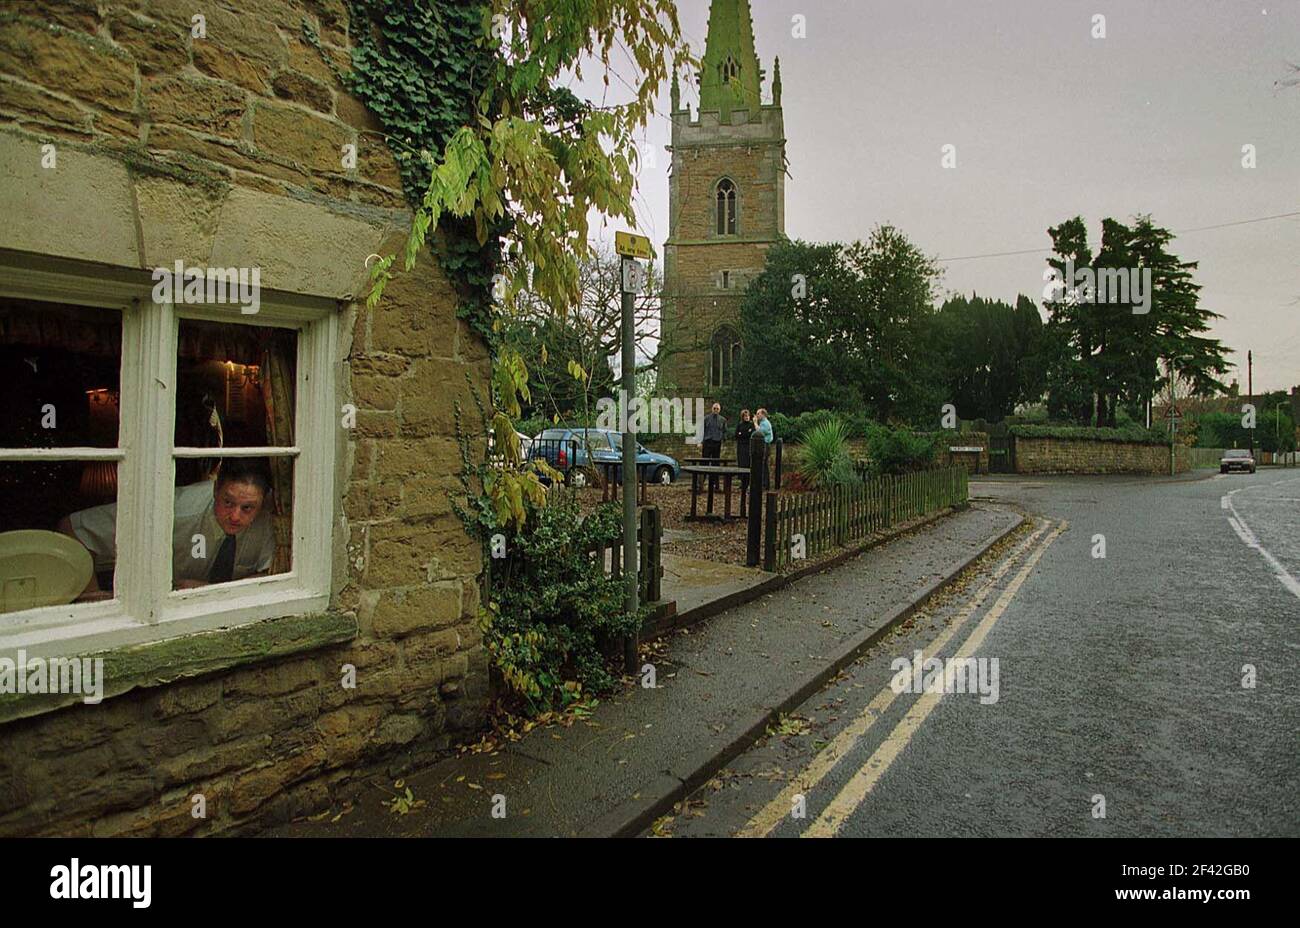 STEVE HUGHES THE LANDLORD OF THE  PEACOCK INN WHO IS IN FAVOUR OF  CROSSROADS COMING TO THE VILLAGE, LOOKS OUT DOWN THE MAIN STREET IN REDMILE.24/11/00 PILSTON. Stock Photo